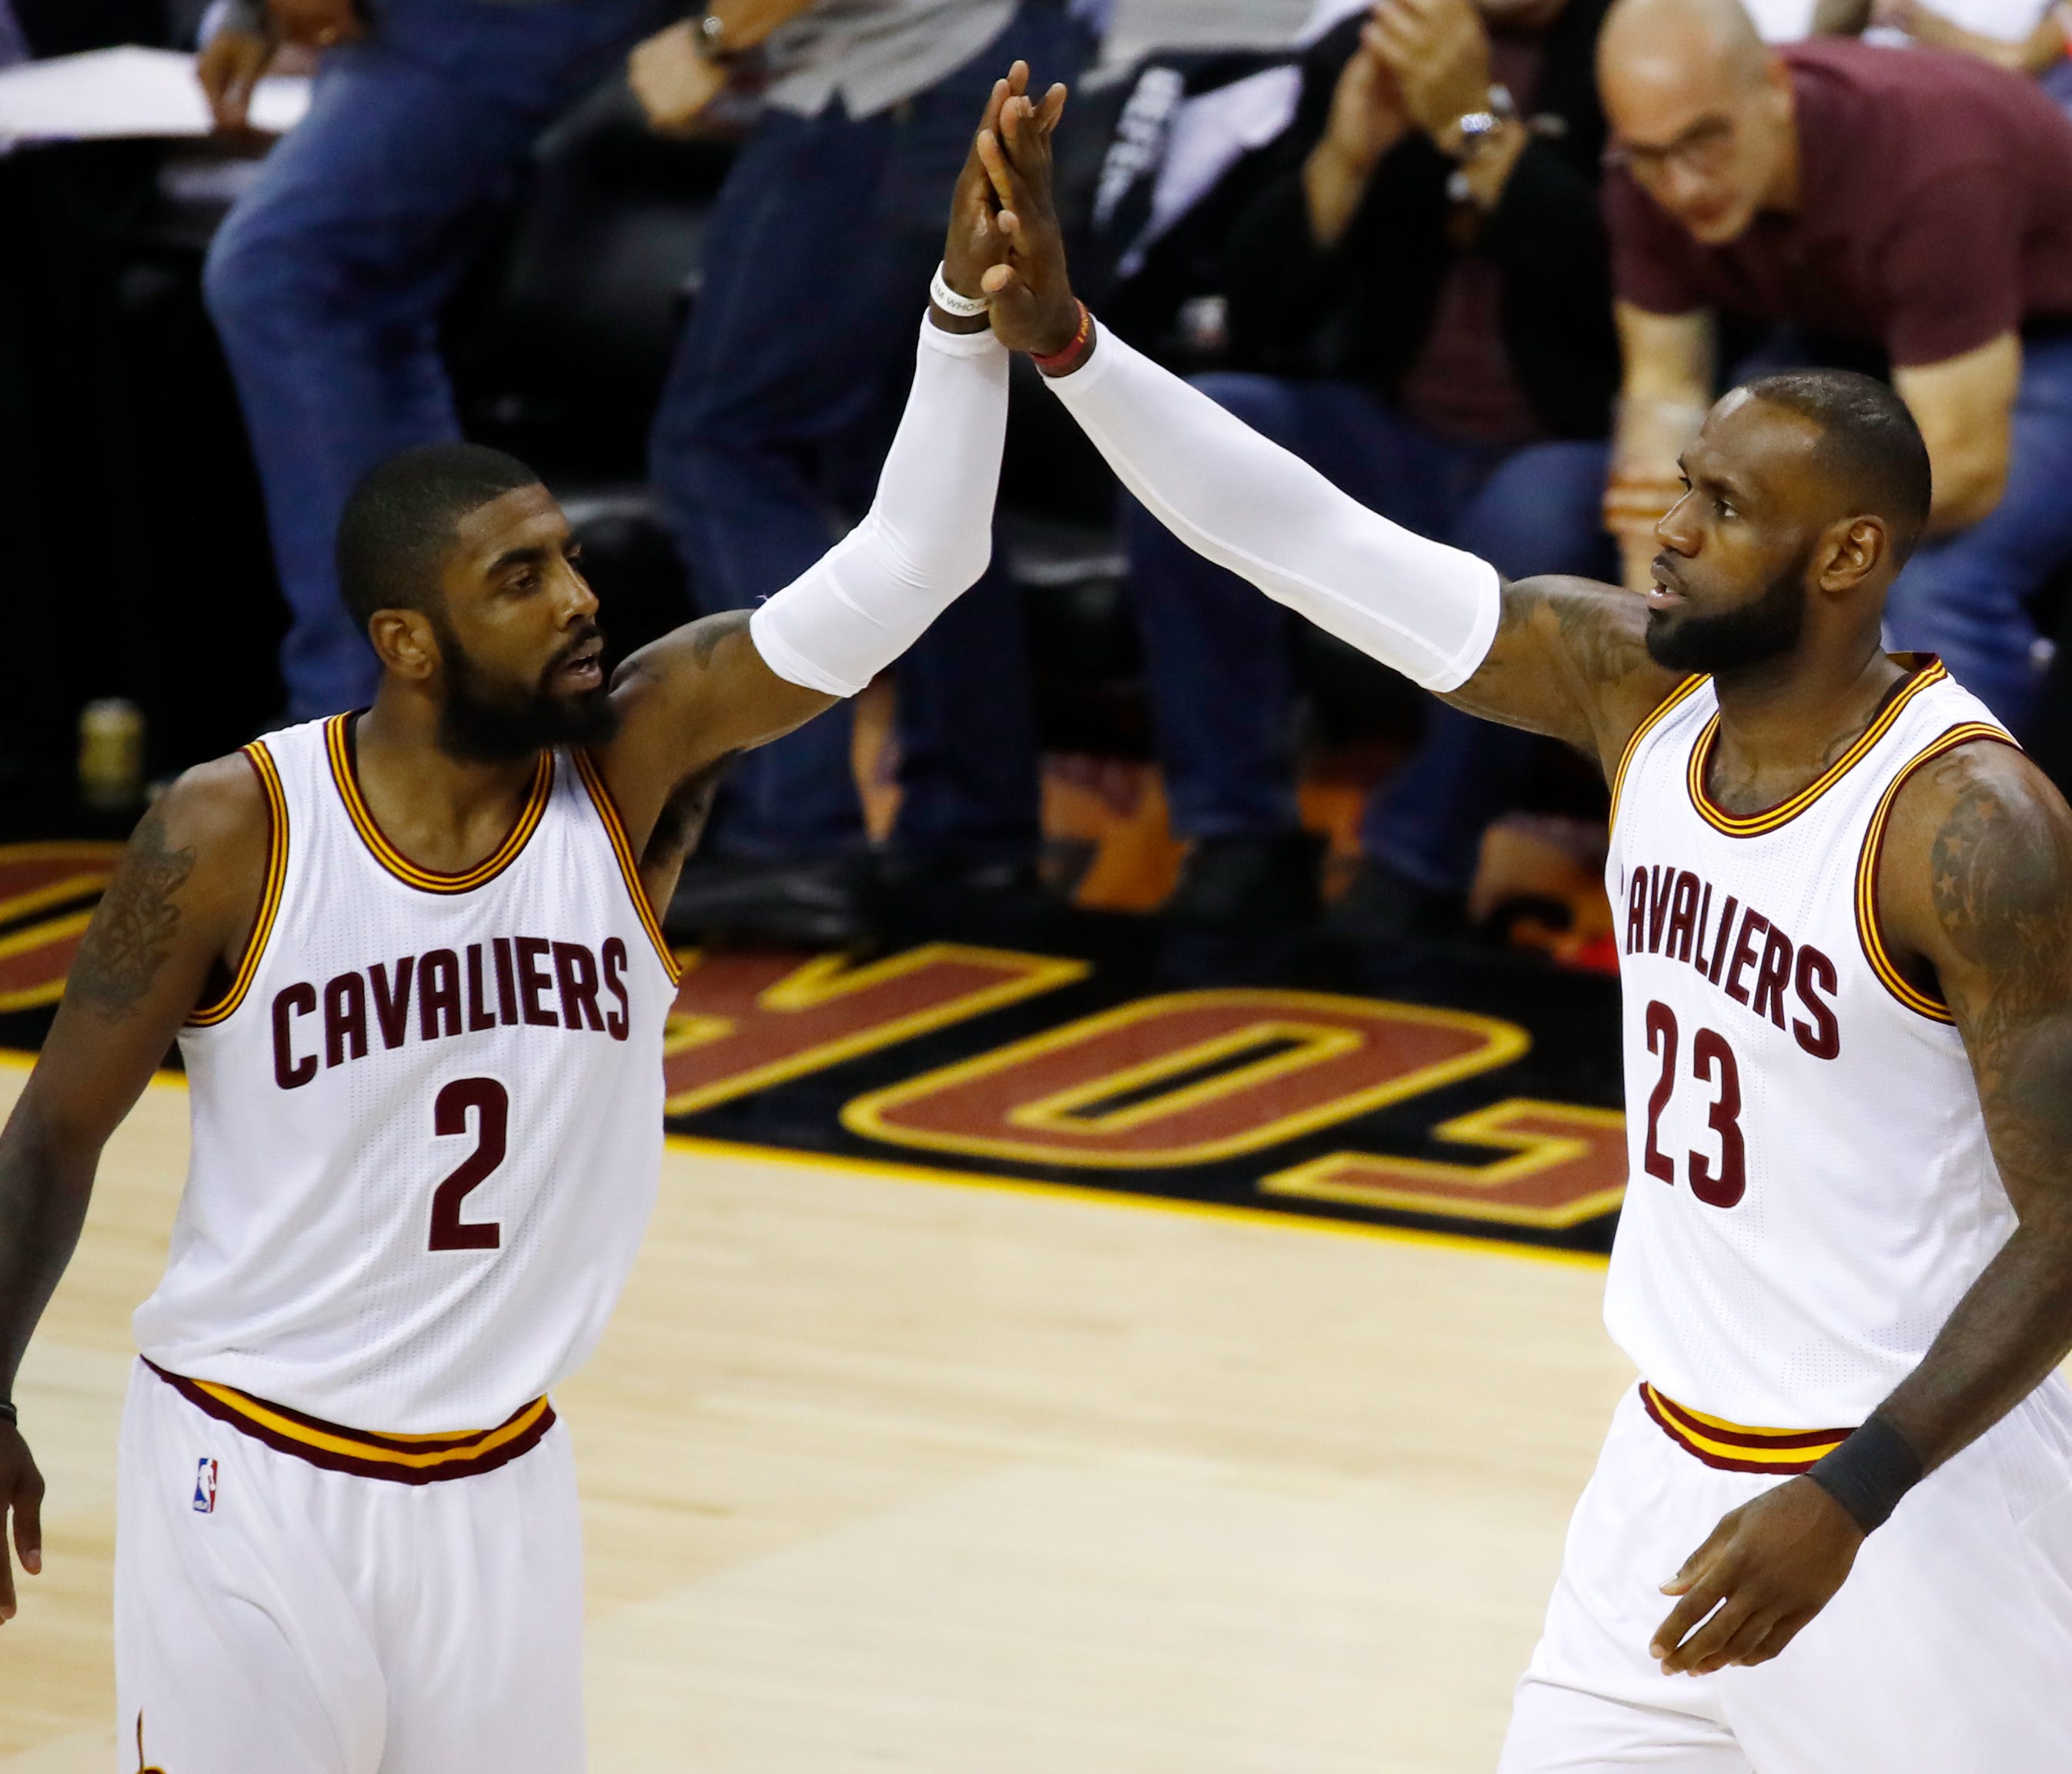 CLEVELAND, OH - JUNE 09: Kyrie Irving #2 and LeBron James #23 of the Cleveland Cavaliers high five against the Golden State Warriors in Game 4 of the 2017 NBA Finals at Quicken Loans Arena on June 9, 2017 in Cleveland, Ohio. NOTE TO USER: User expres